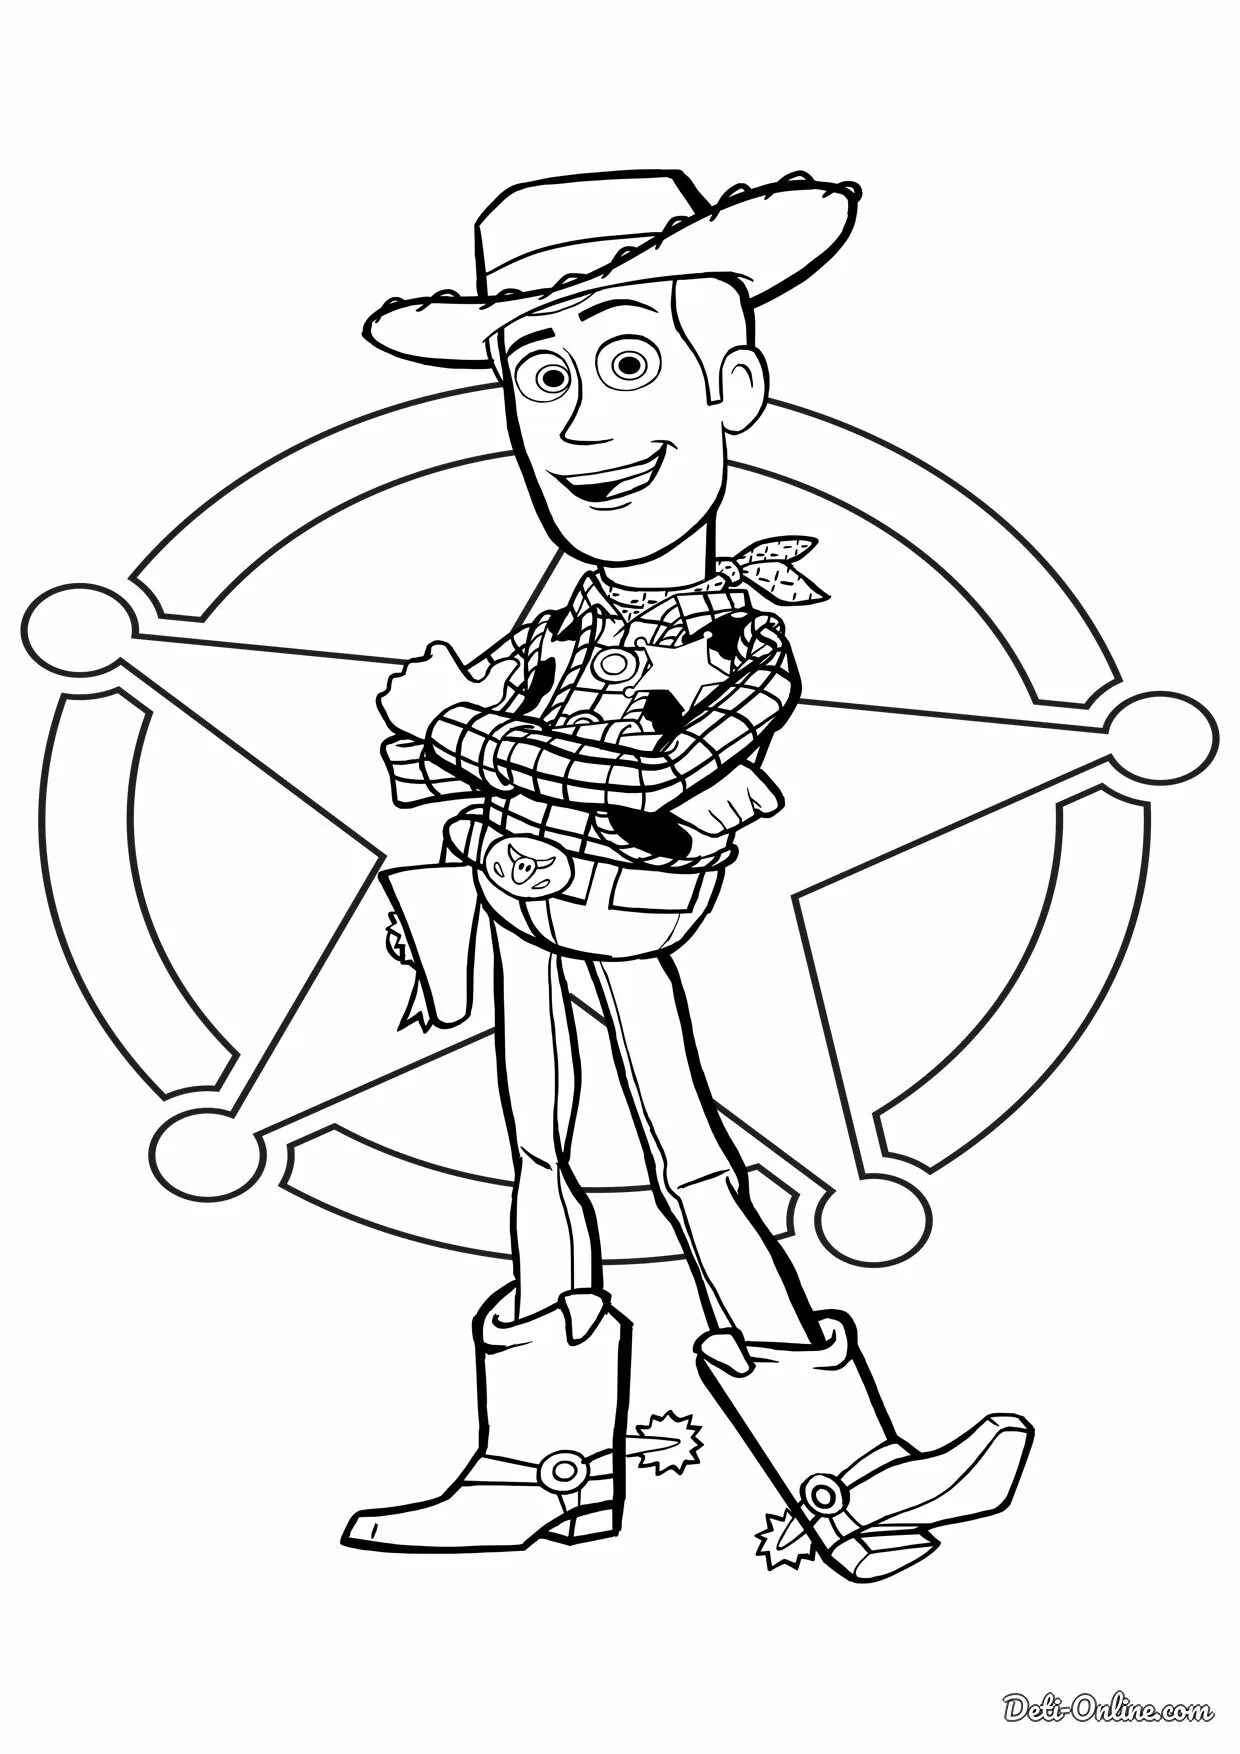 Coloring page energetic sheriff